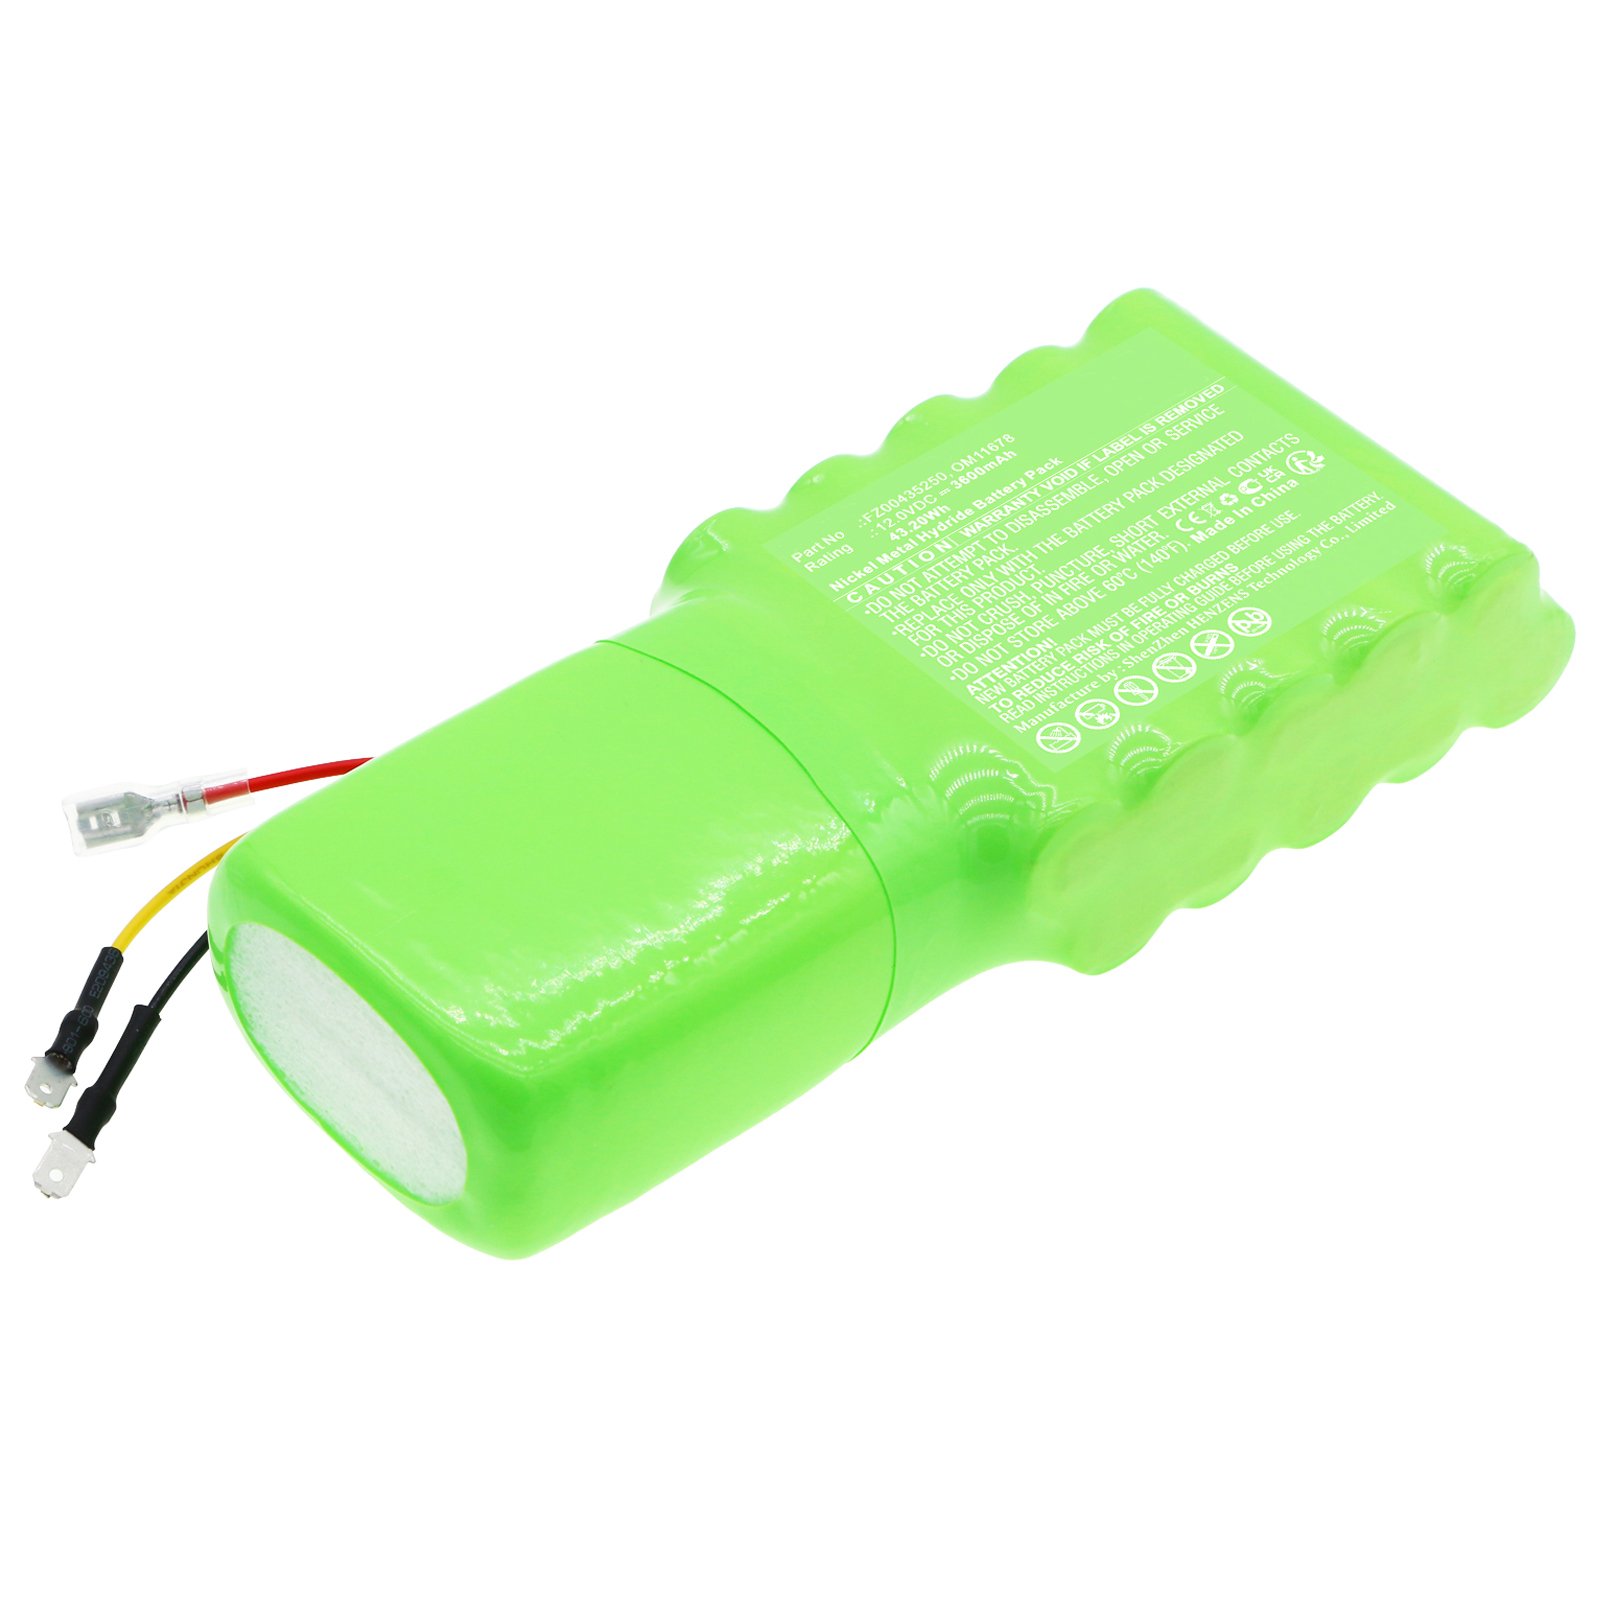 Synergy Digital Medical Battery, Compatible with B.Braun OM11678 Medical Battery (Ni-MH, 12V, 3600mAh)